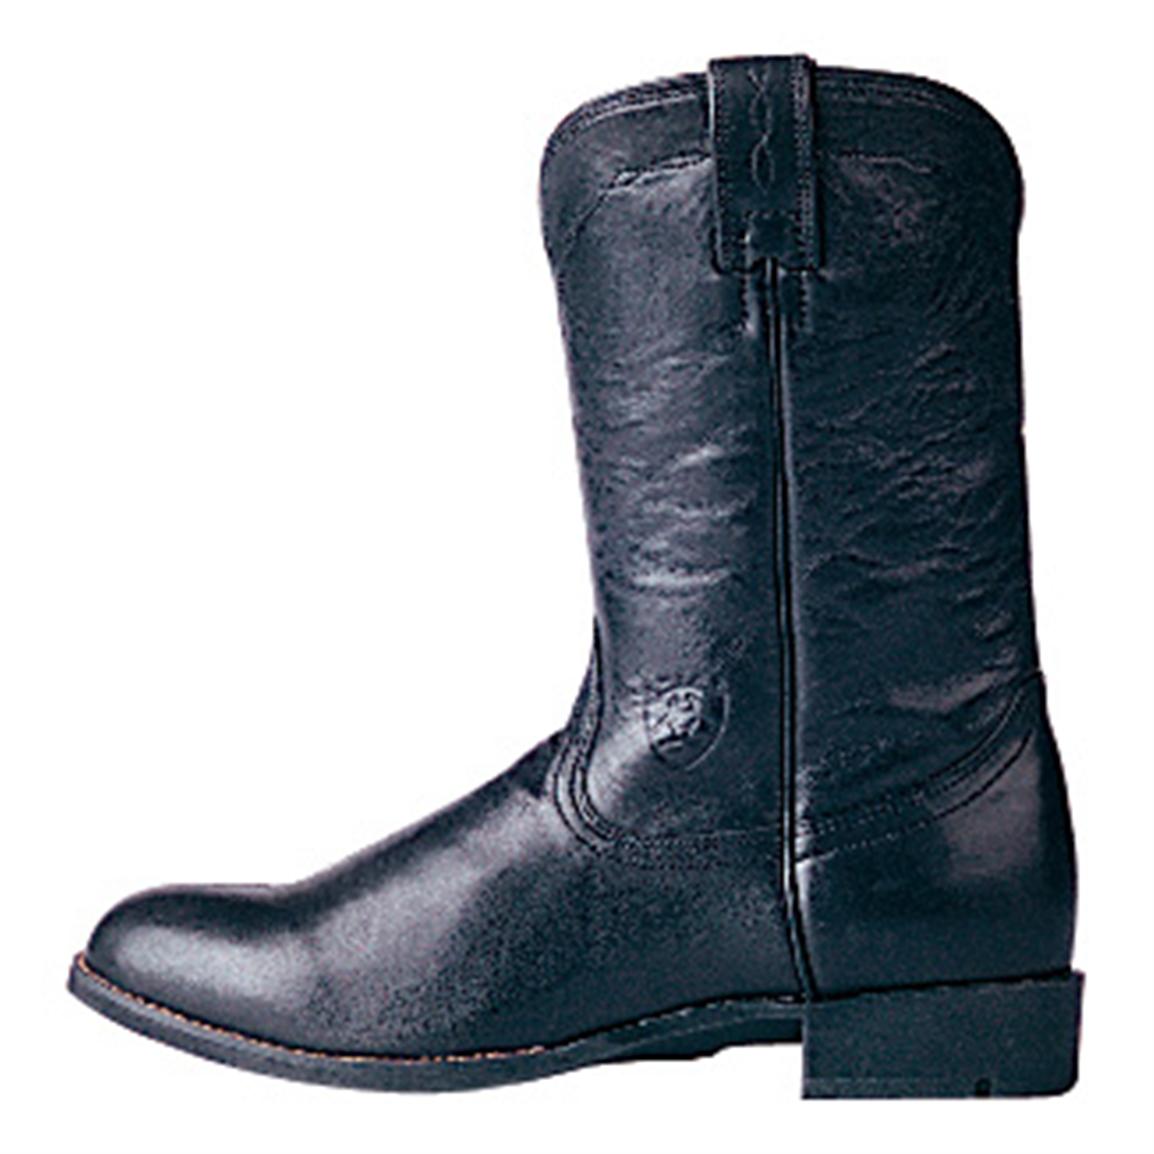 Black Ariat Boots For Women | Coltford Boots